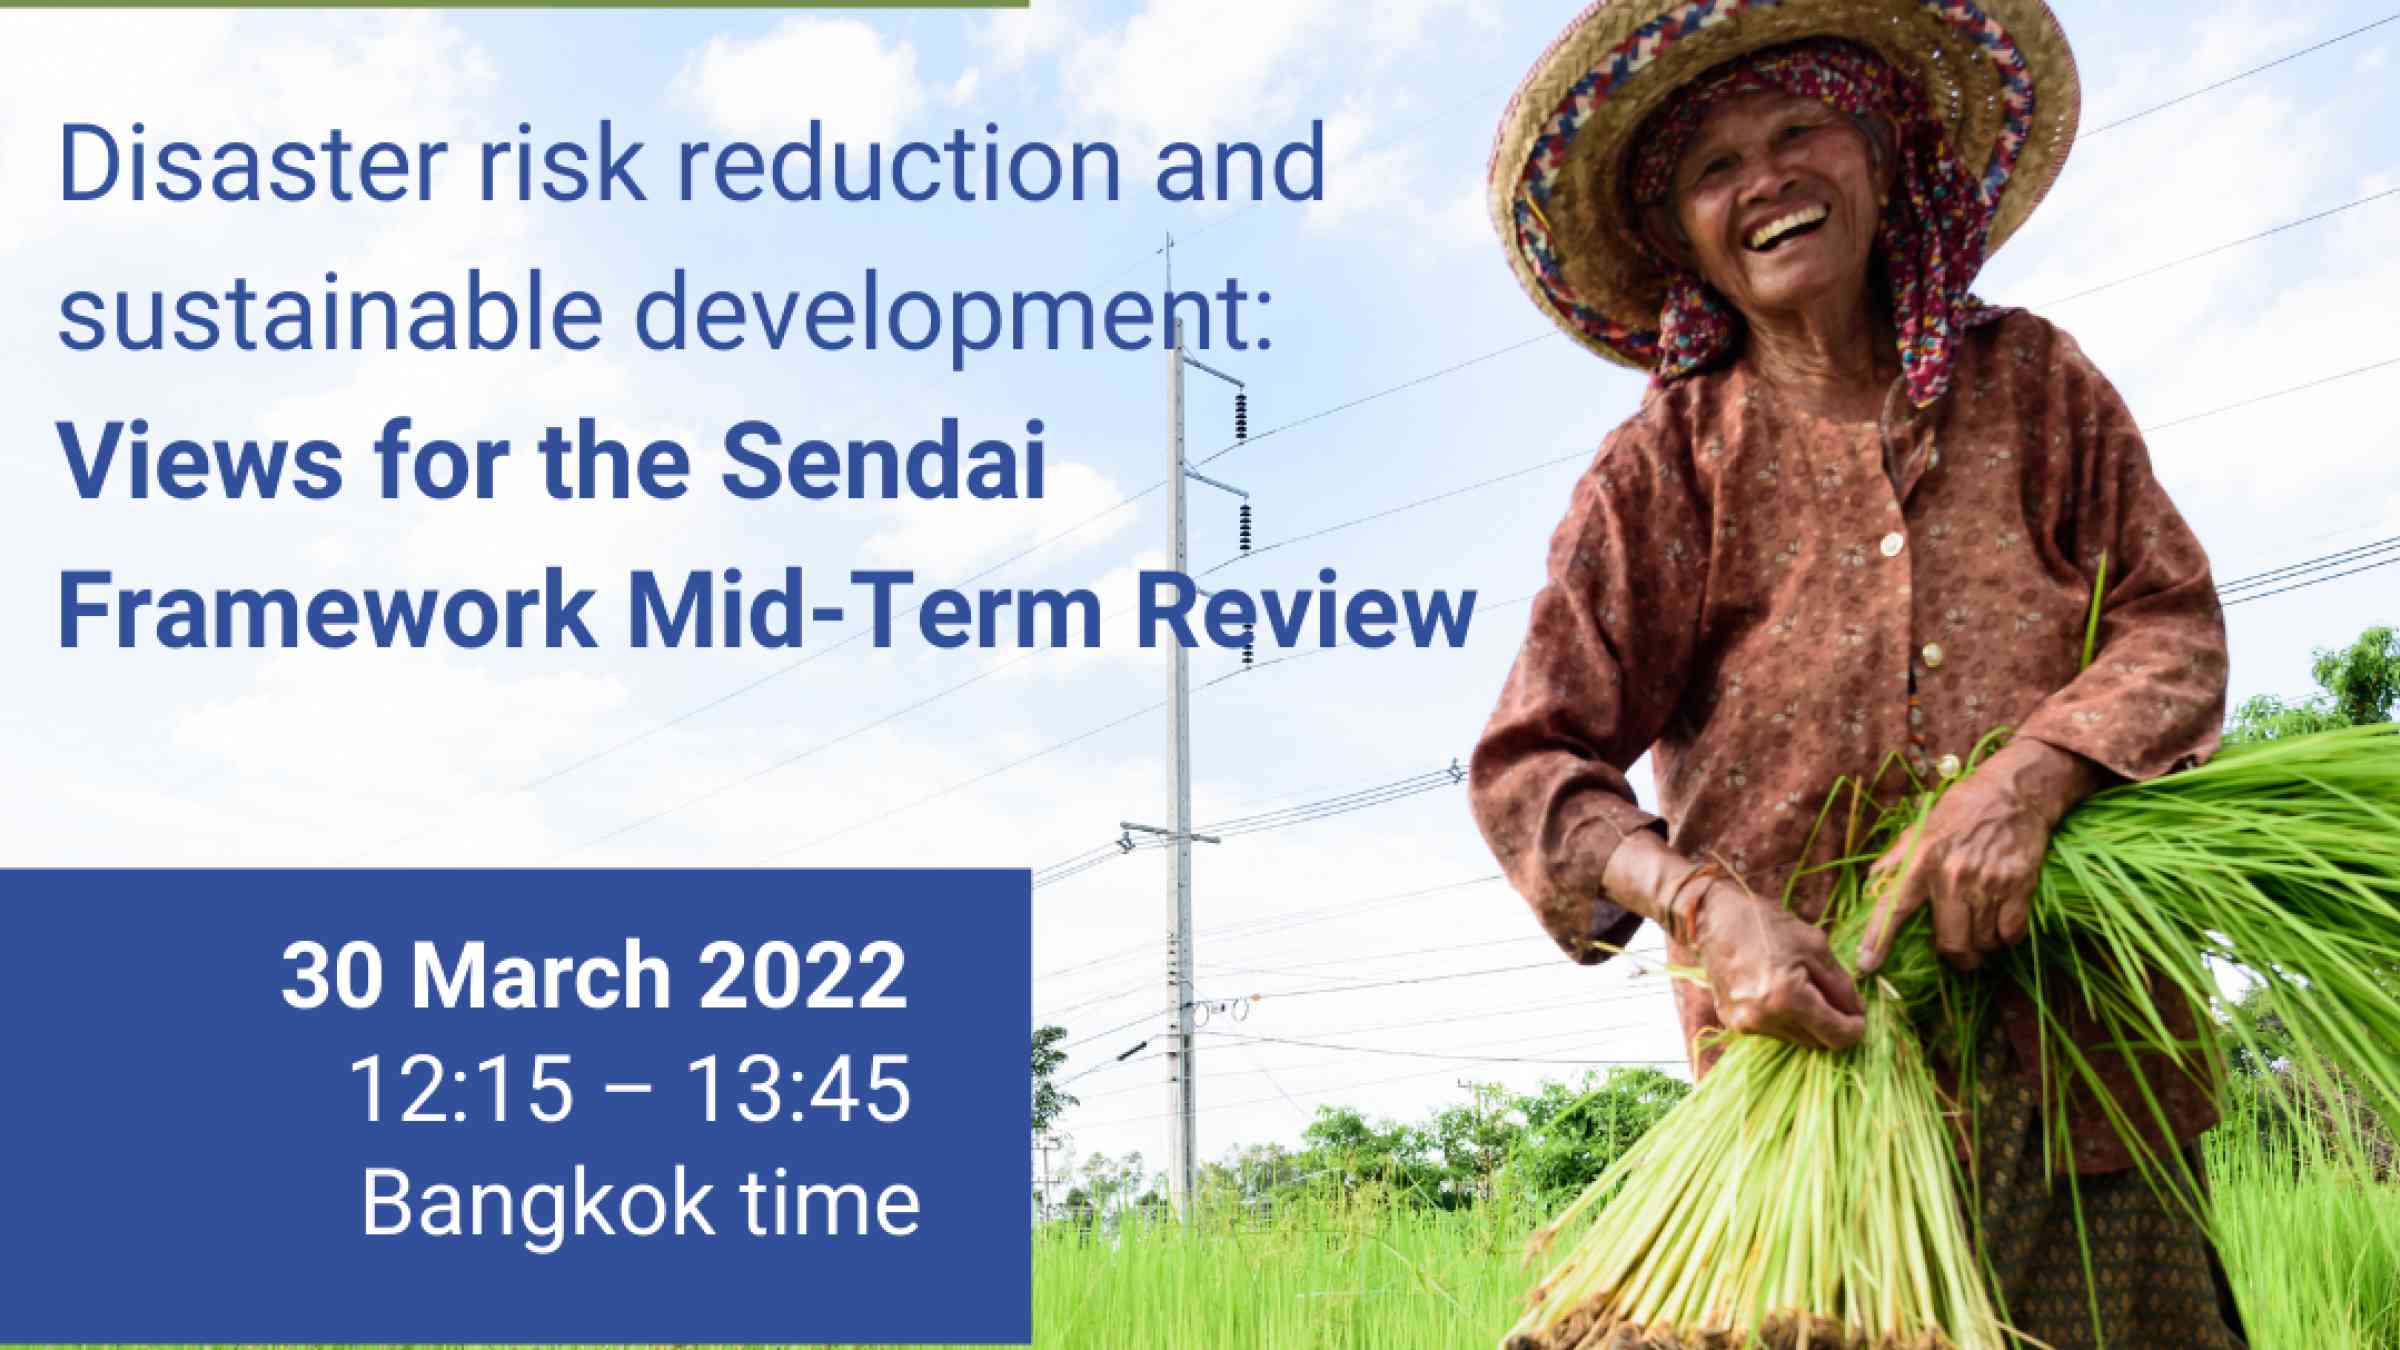 Disaster risk reduction and sustainable development: views for the Sendai Framework Mid-Term Review